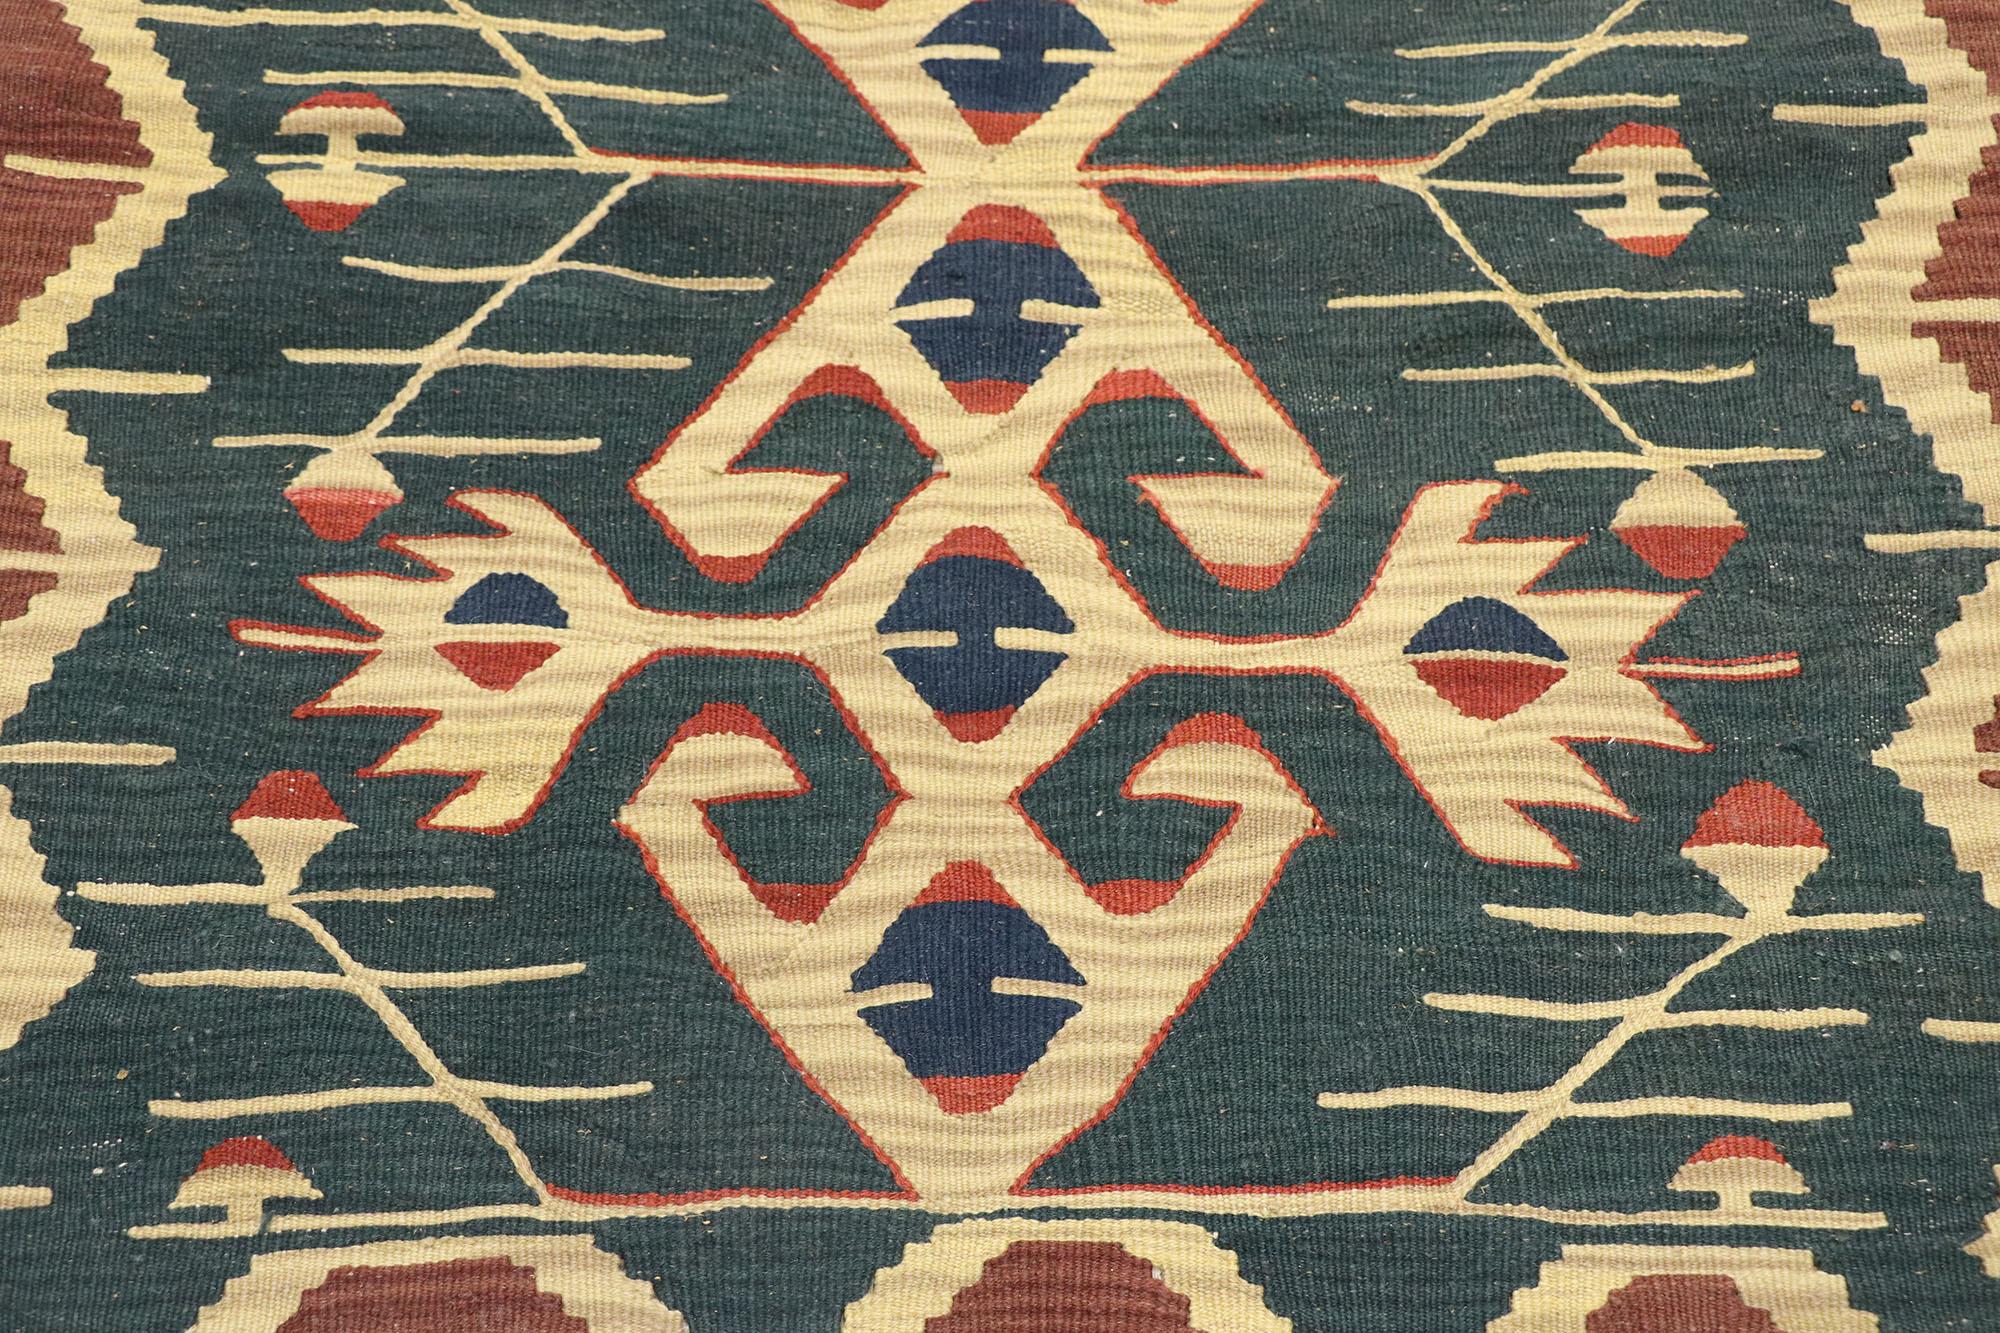 Vintage Persian Shiraz Kilim Rug, Modern Southwest Style Meets Luxury Lodge In Good Condition For Sale In Dallas, TX